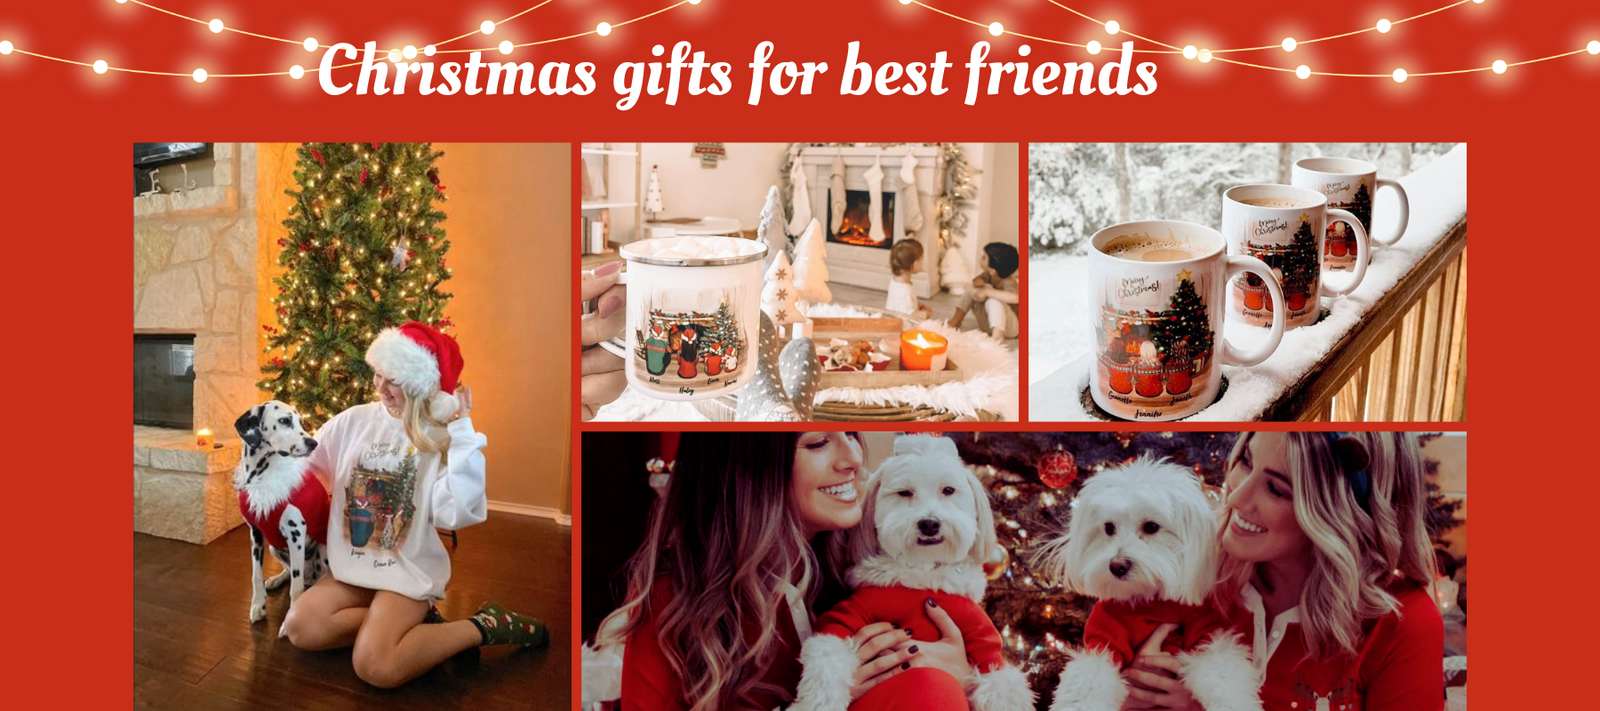 Buy The Best Christmas Gifts For Best Friends Online in India